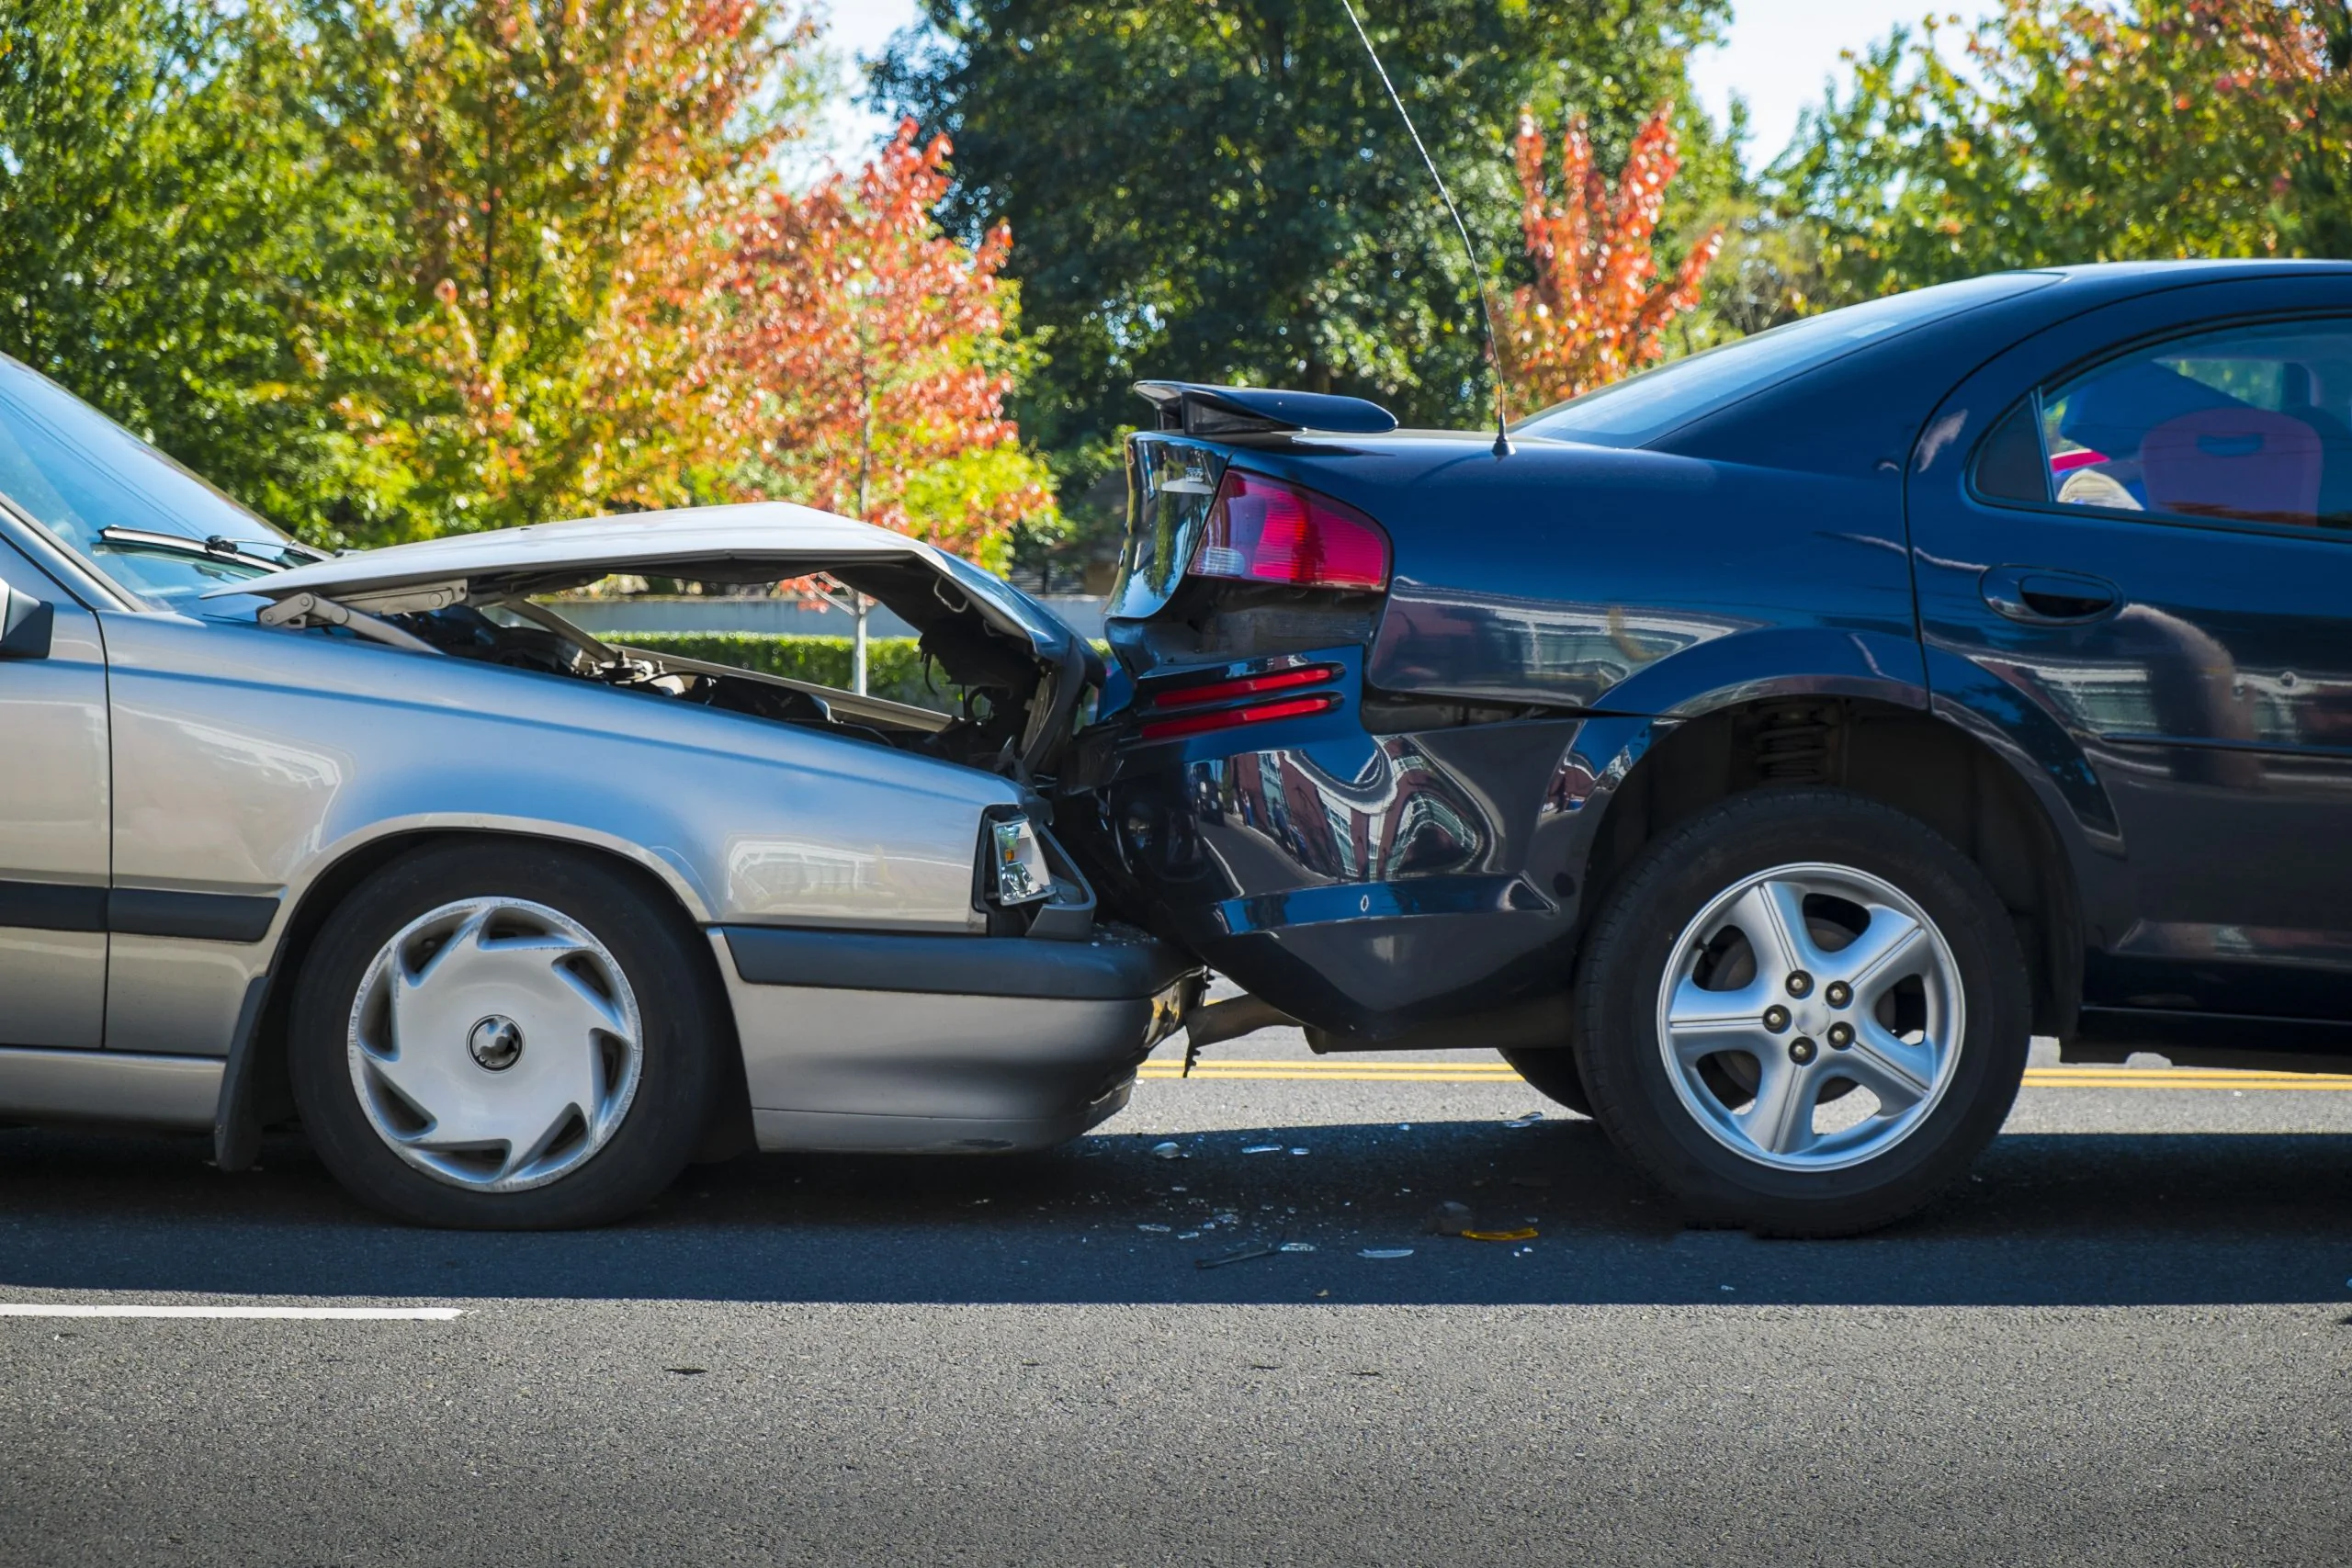 Rear-End Accidents in New York: Common Yet Misunderstood